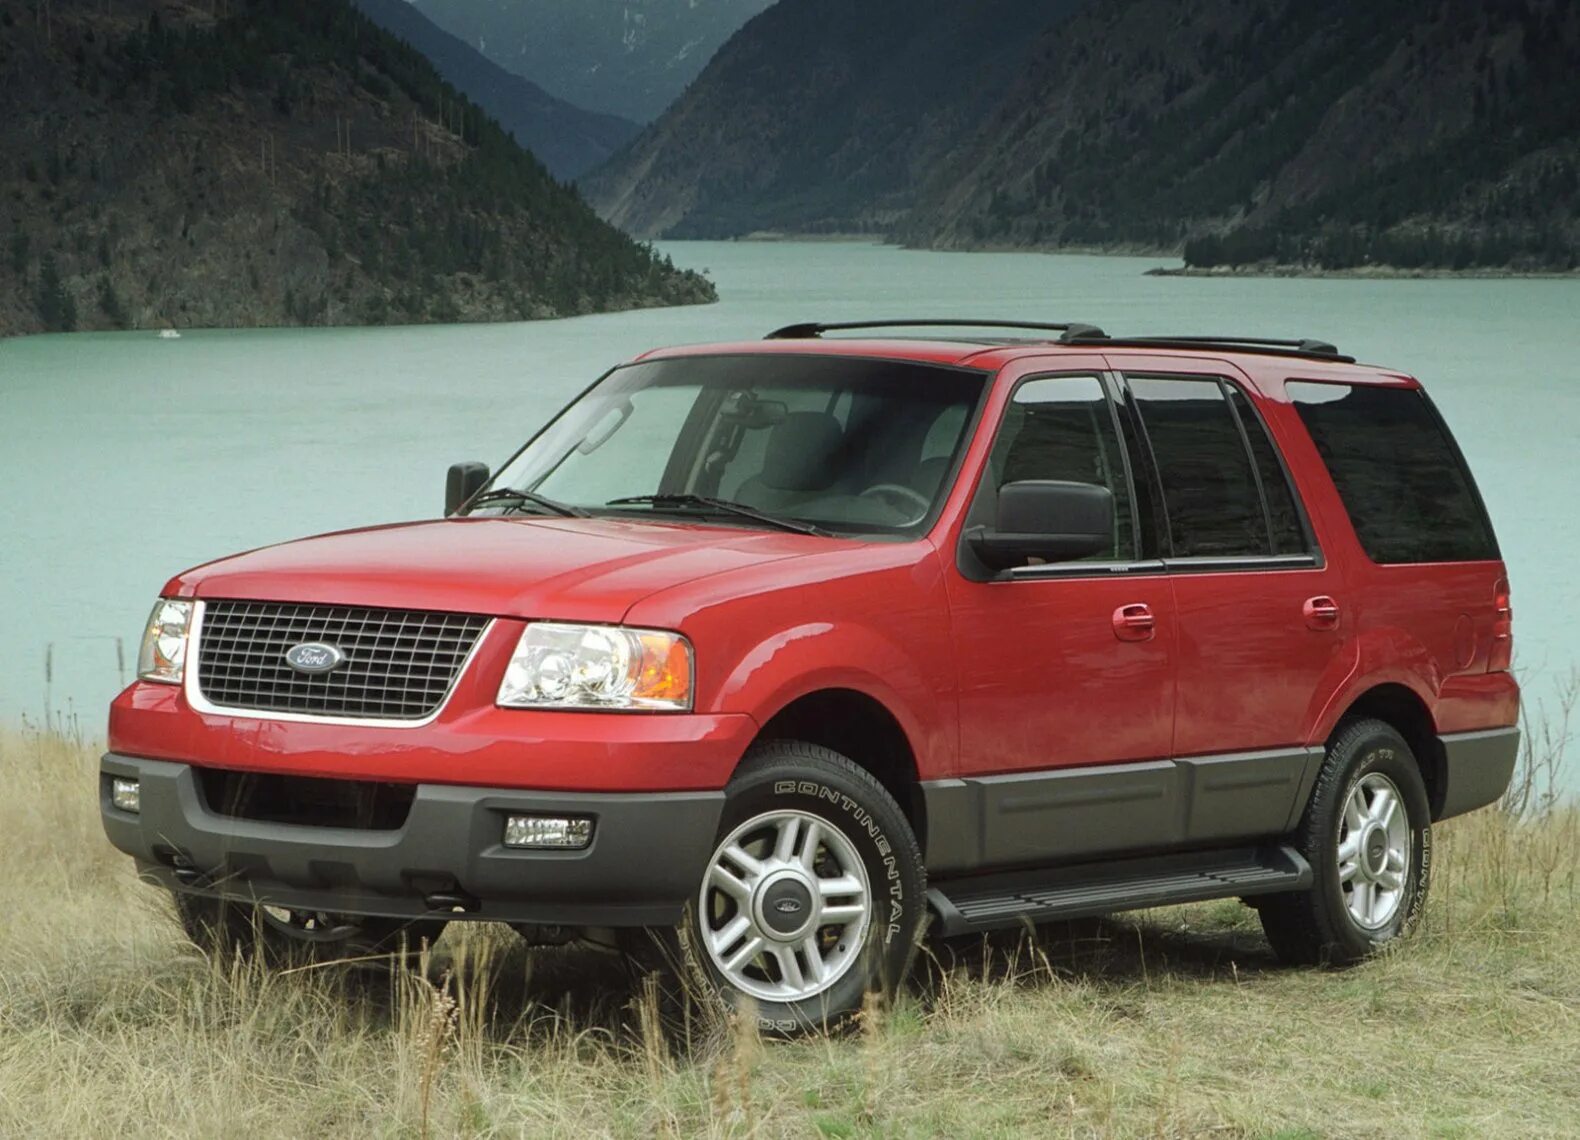 Ford Expedition 2. Форд Экспедишн 2003. Форд Экспедишн 1 поколение. Ford Expedition II 5.4.